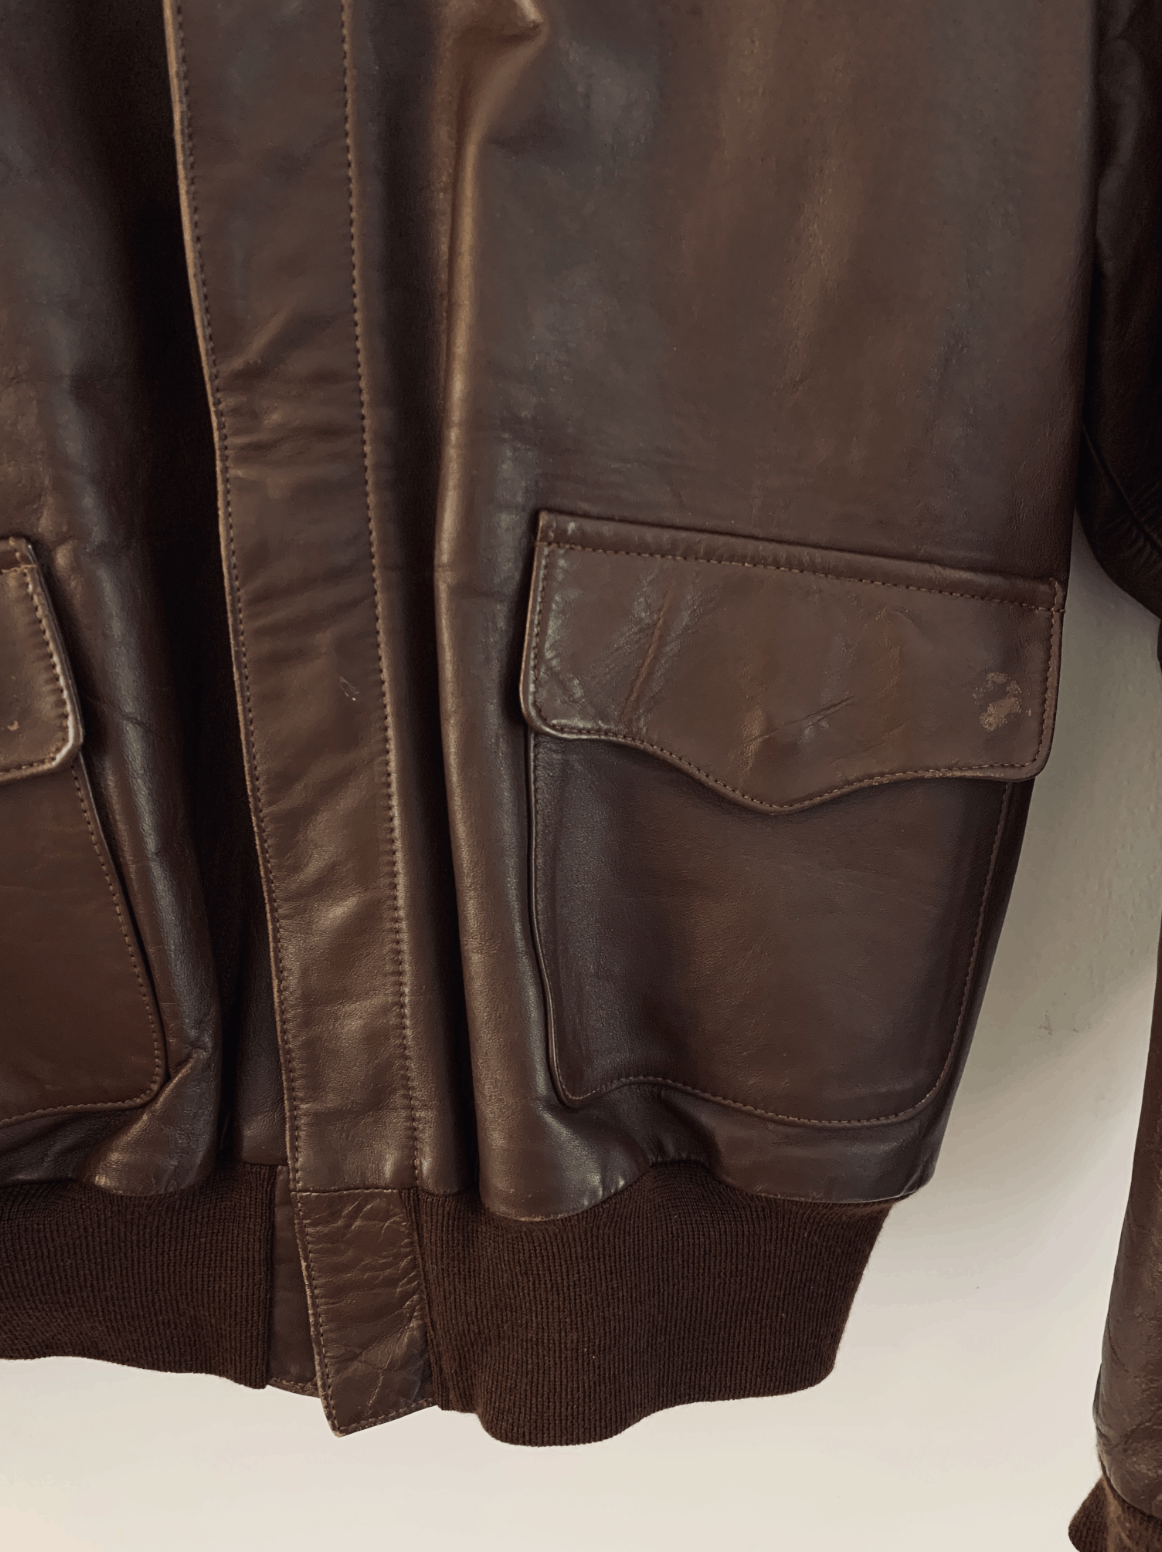 The Real McCoy's Real McCoy's Early A2 Leather Bomber Size US XL / EU 56 / 4 - 8 Thumbnail